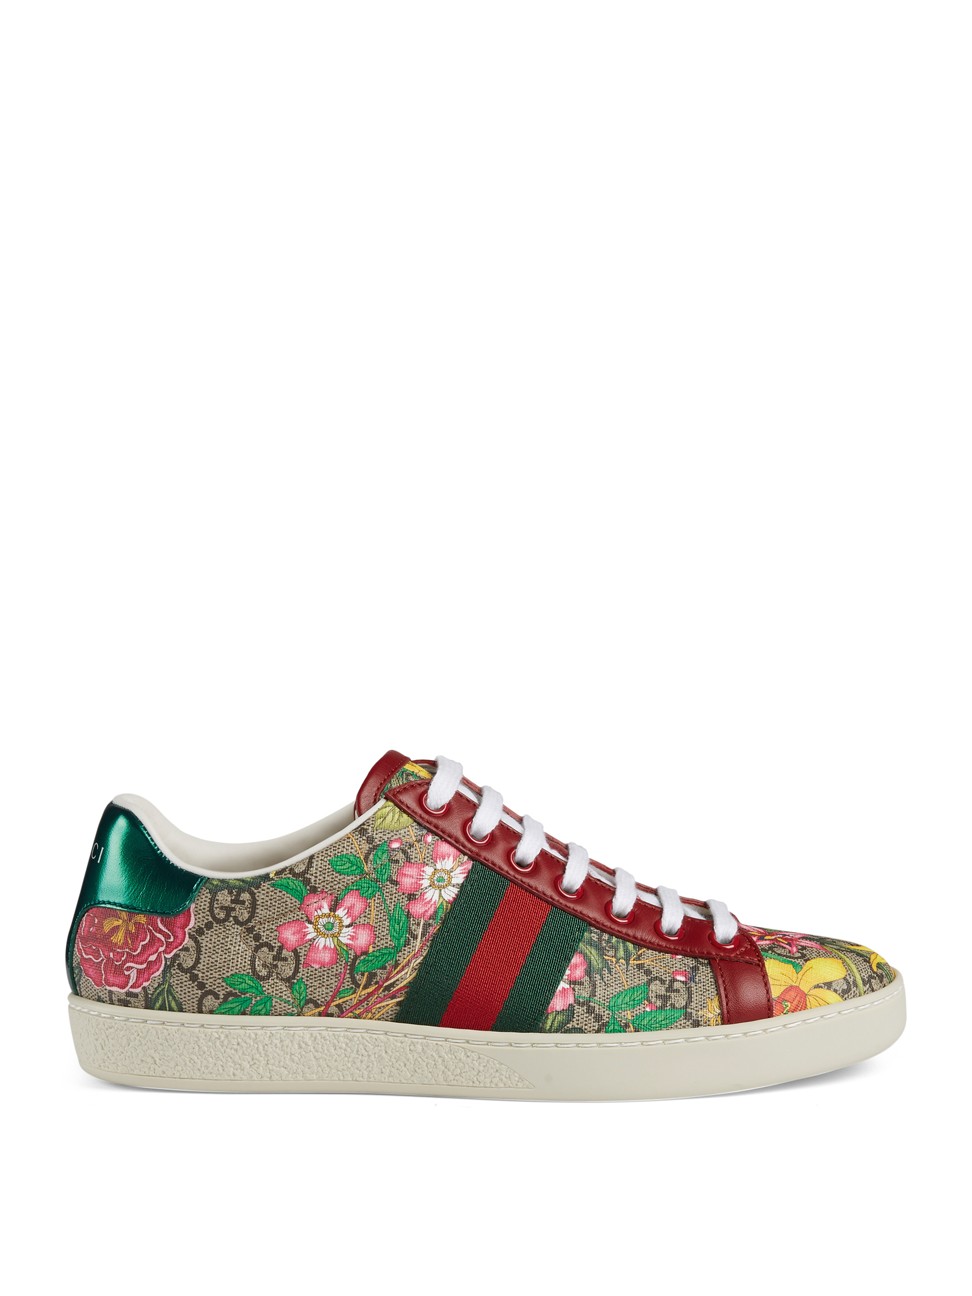 Gucci creative director Alessandro Michele brings the whimsically-illustrated insects and flowers of the archival Flora pattern onto the iconic GG motif canvas.